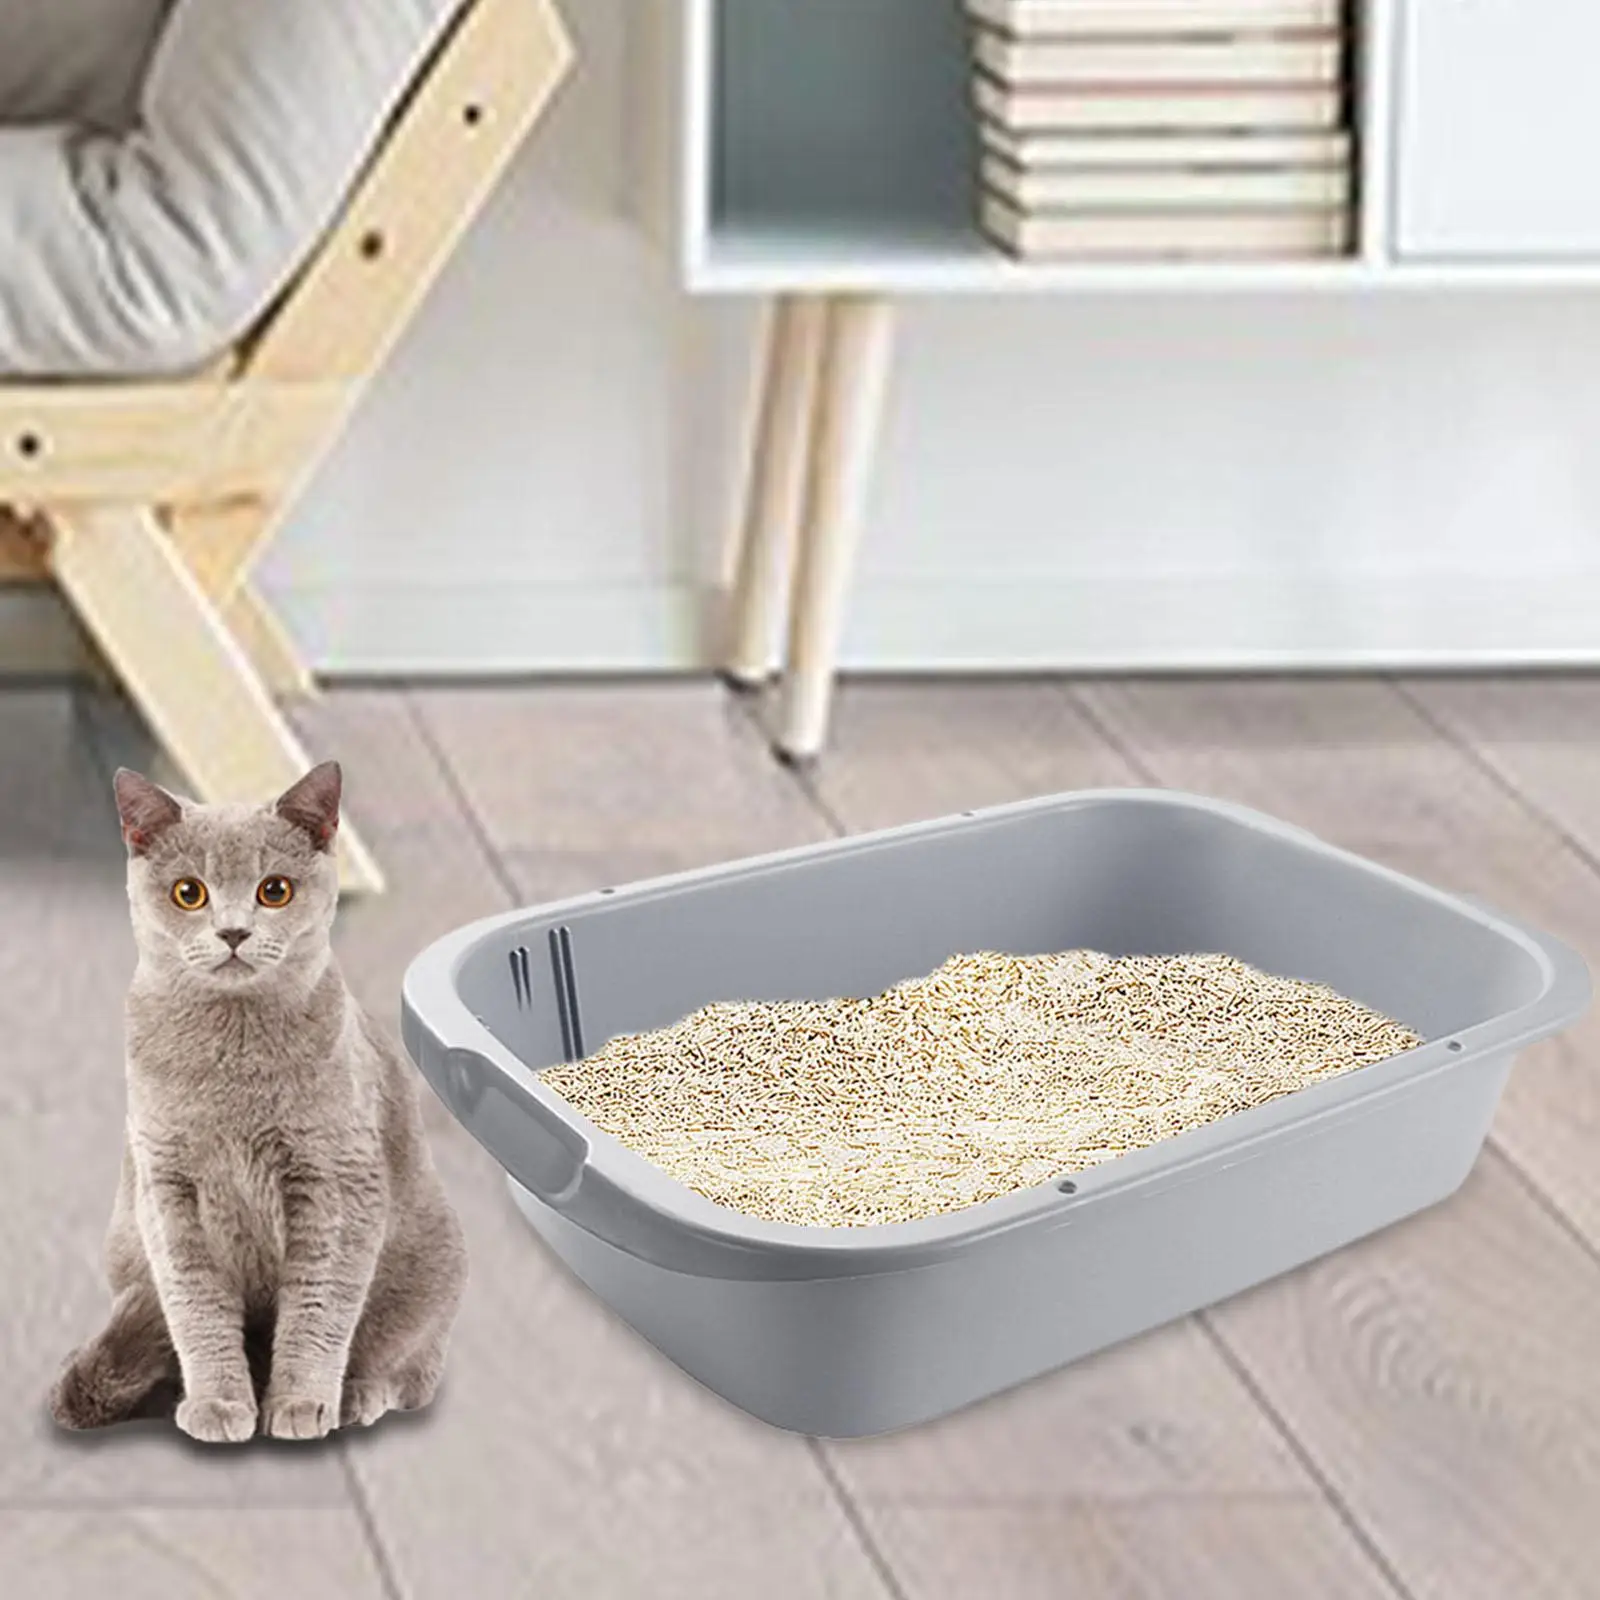 Pet Litter Tray Potty Toilet Toilette Sand Box Container Open Top Cats Litter Box for Small Animals Kitty Indoor Cats Hamsters